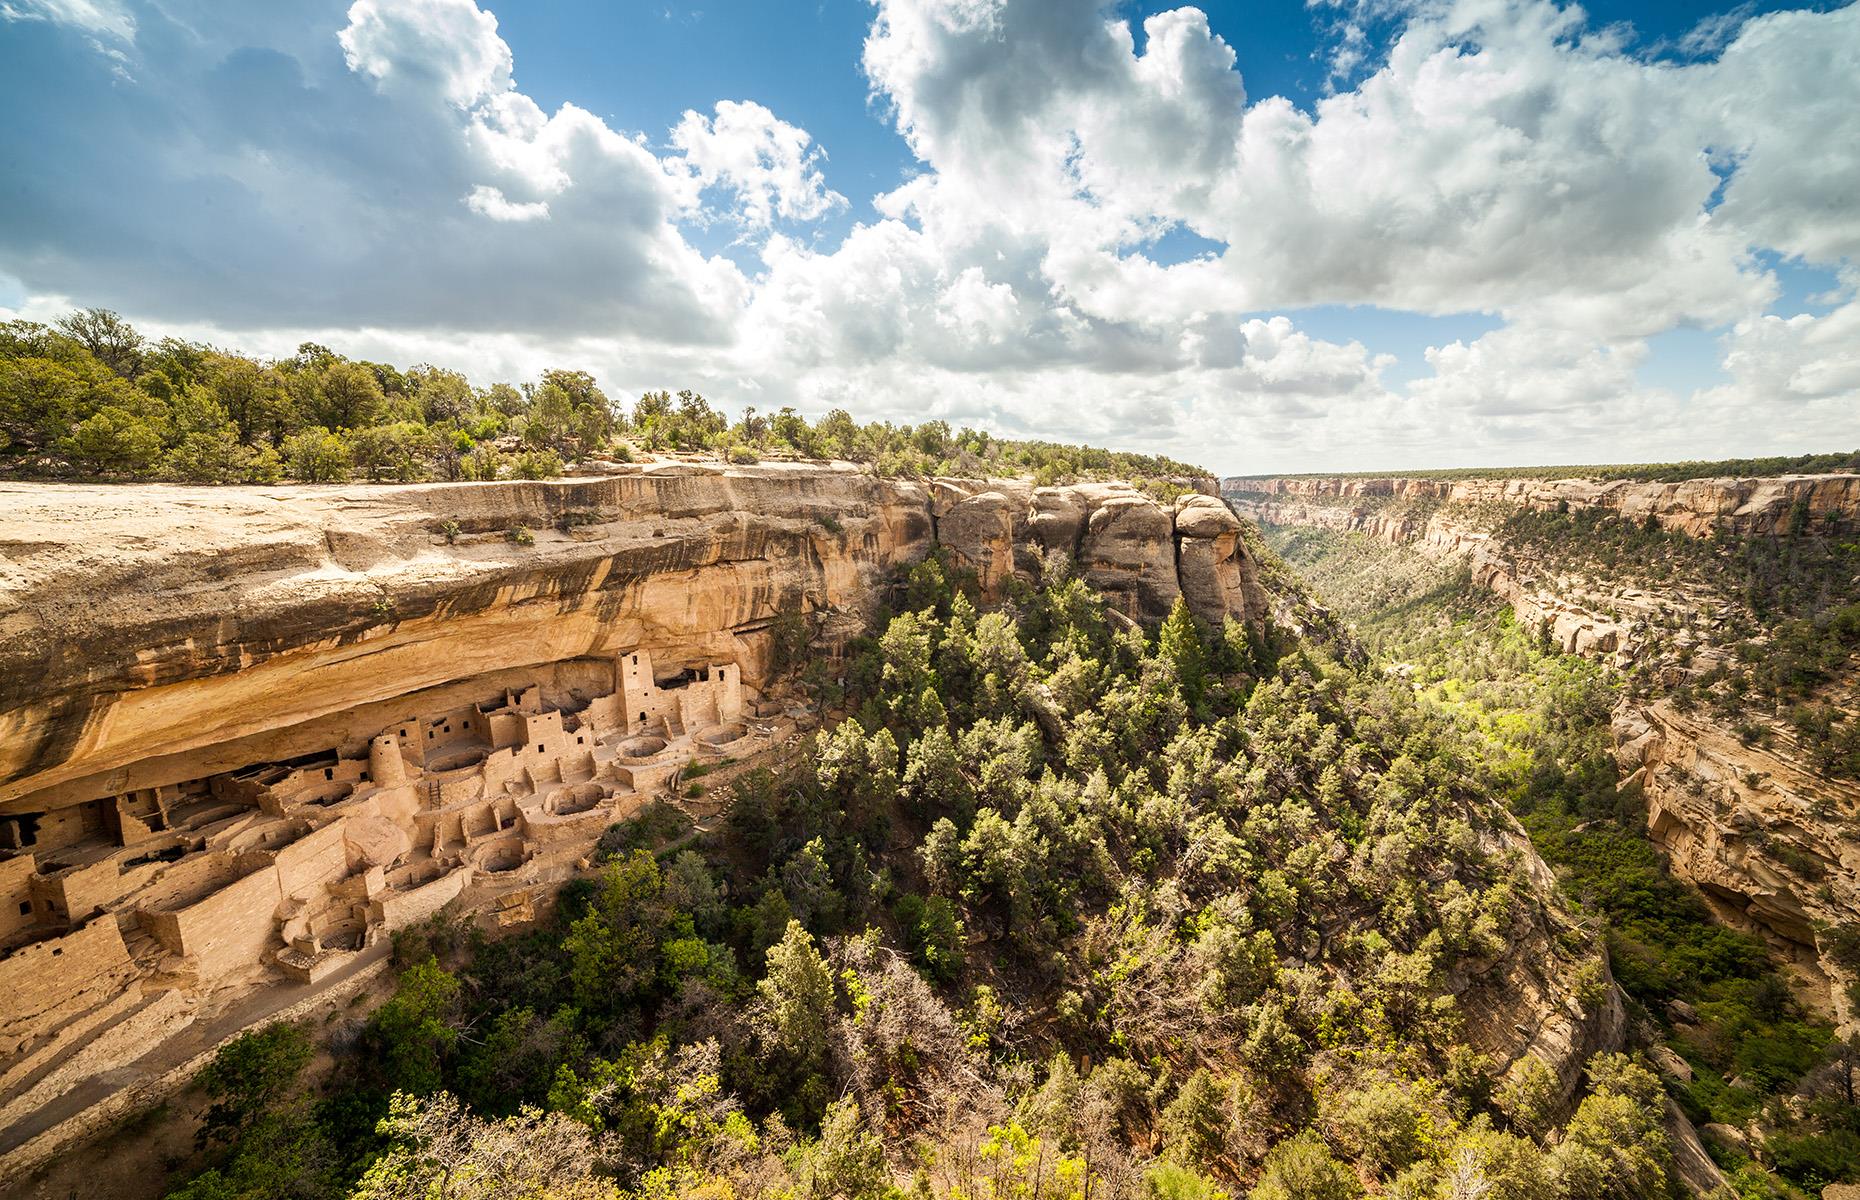 Exploration is how the park got its name. When Spanish explorers in the American Southwest first came upon these towering rock formations, they said it looked like a landscape of tables, covered with foliage and forest. They named it "Mesa Verde", which is Spanish for "green table".